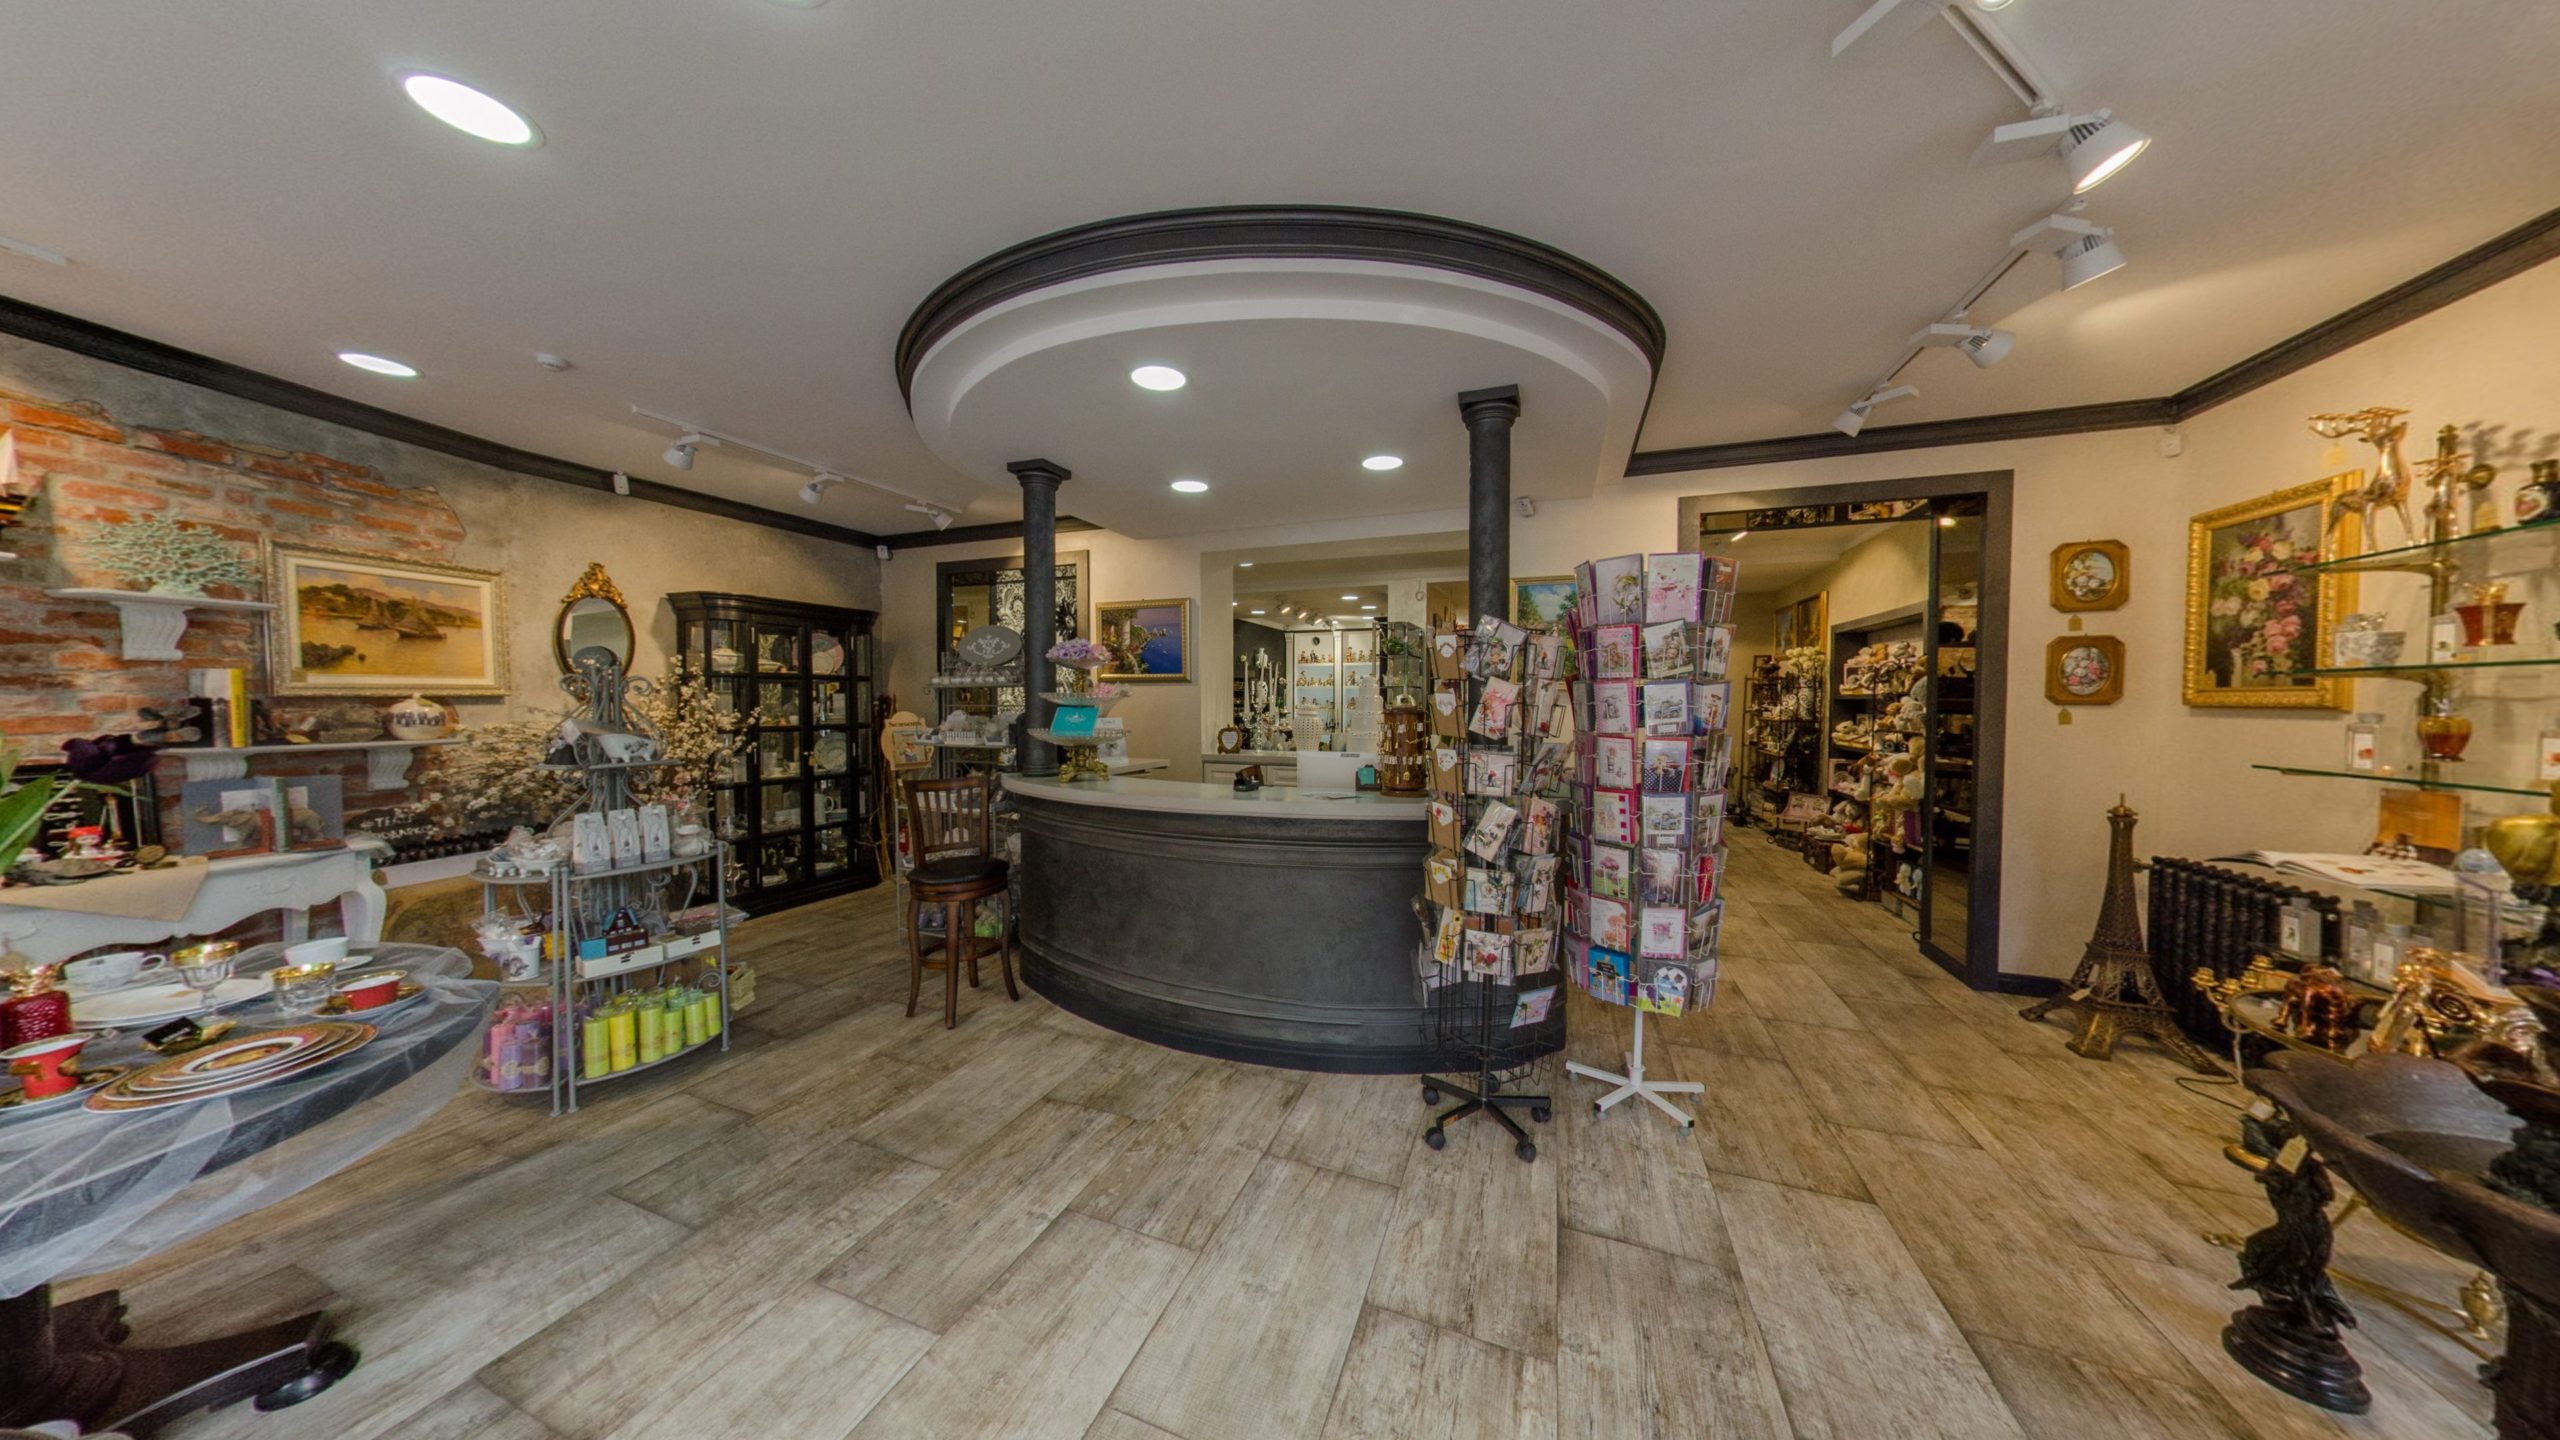 Virtual Tour of the Gift Store in Kaliningrad, Russia.